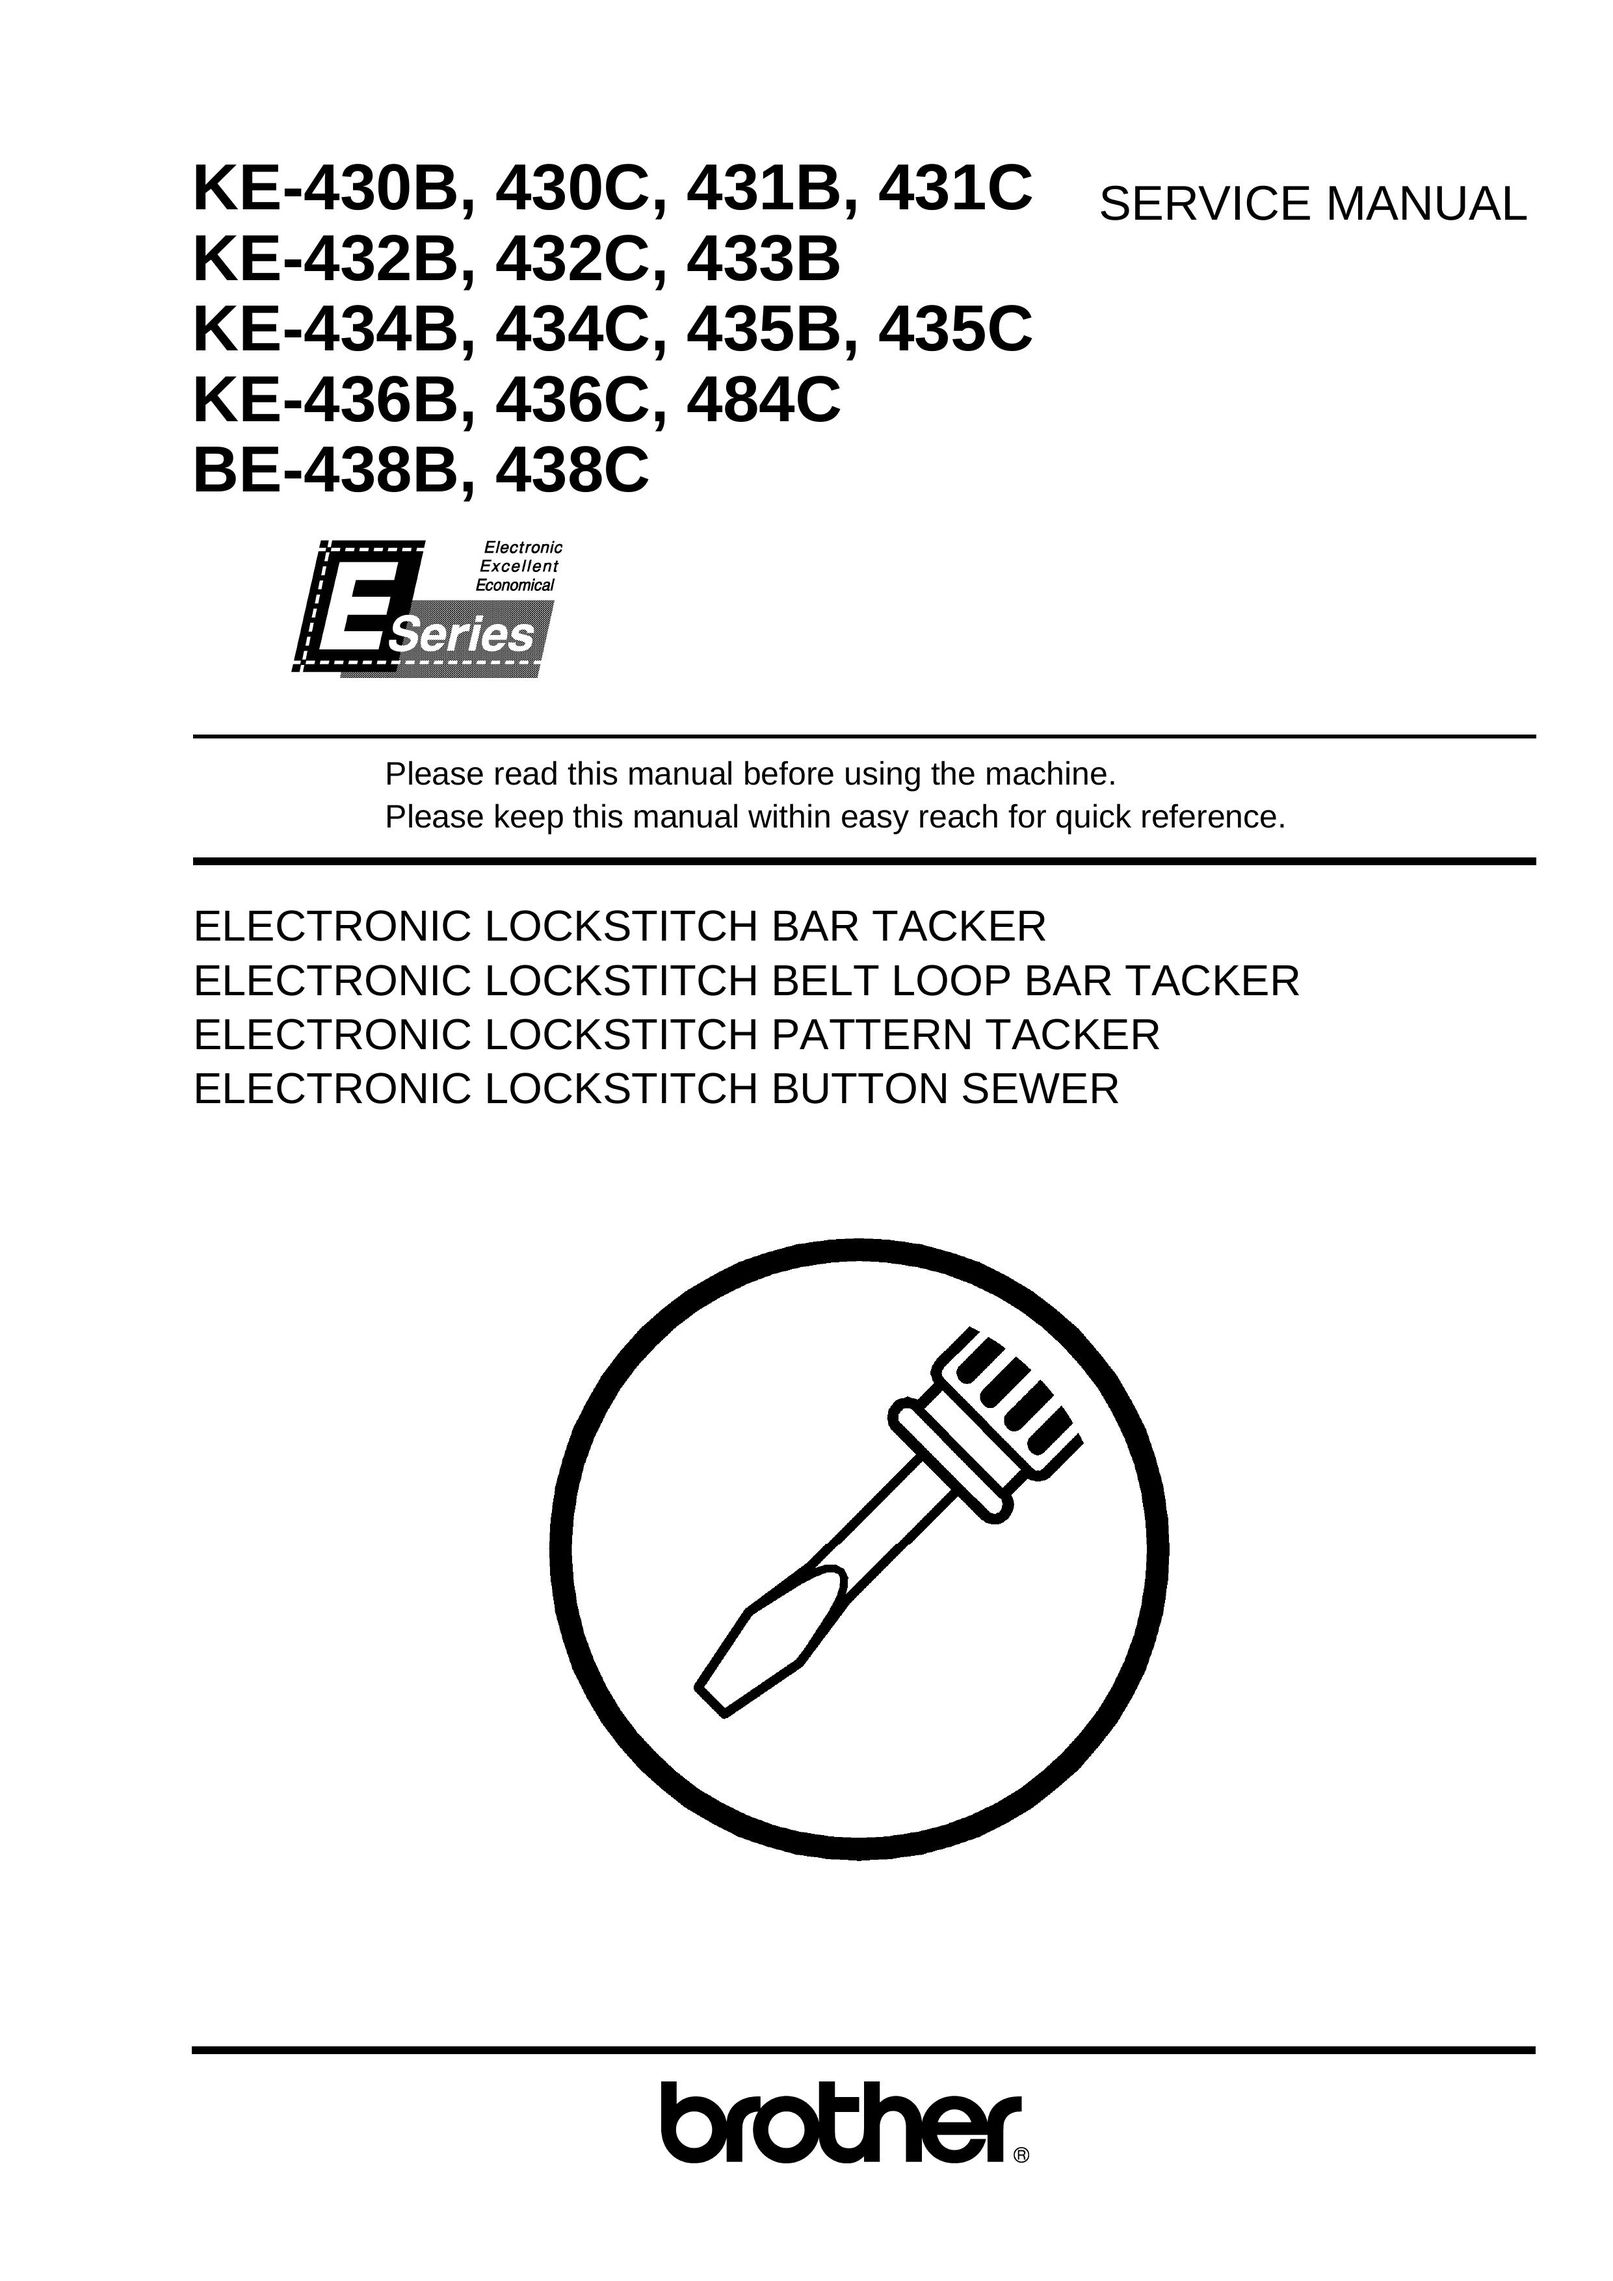 Brother 484C Sewing Machine User Manual (Page 1)